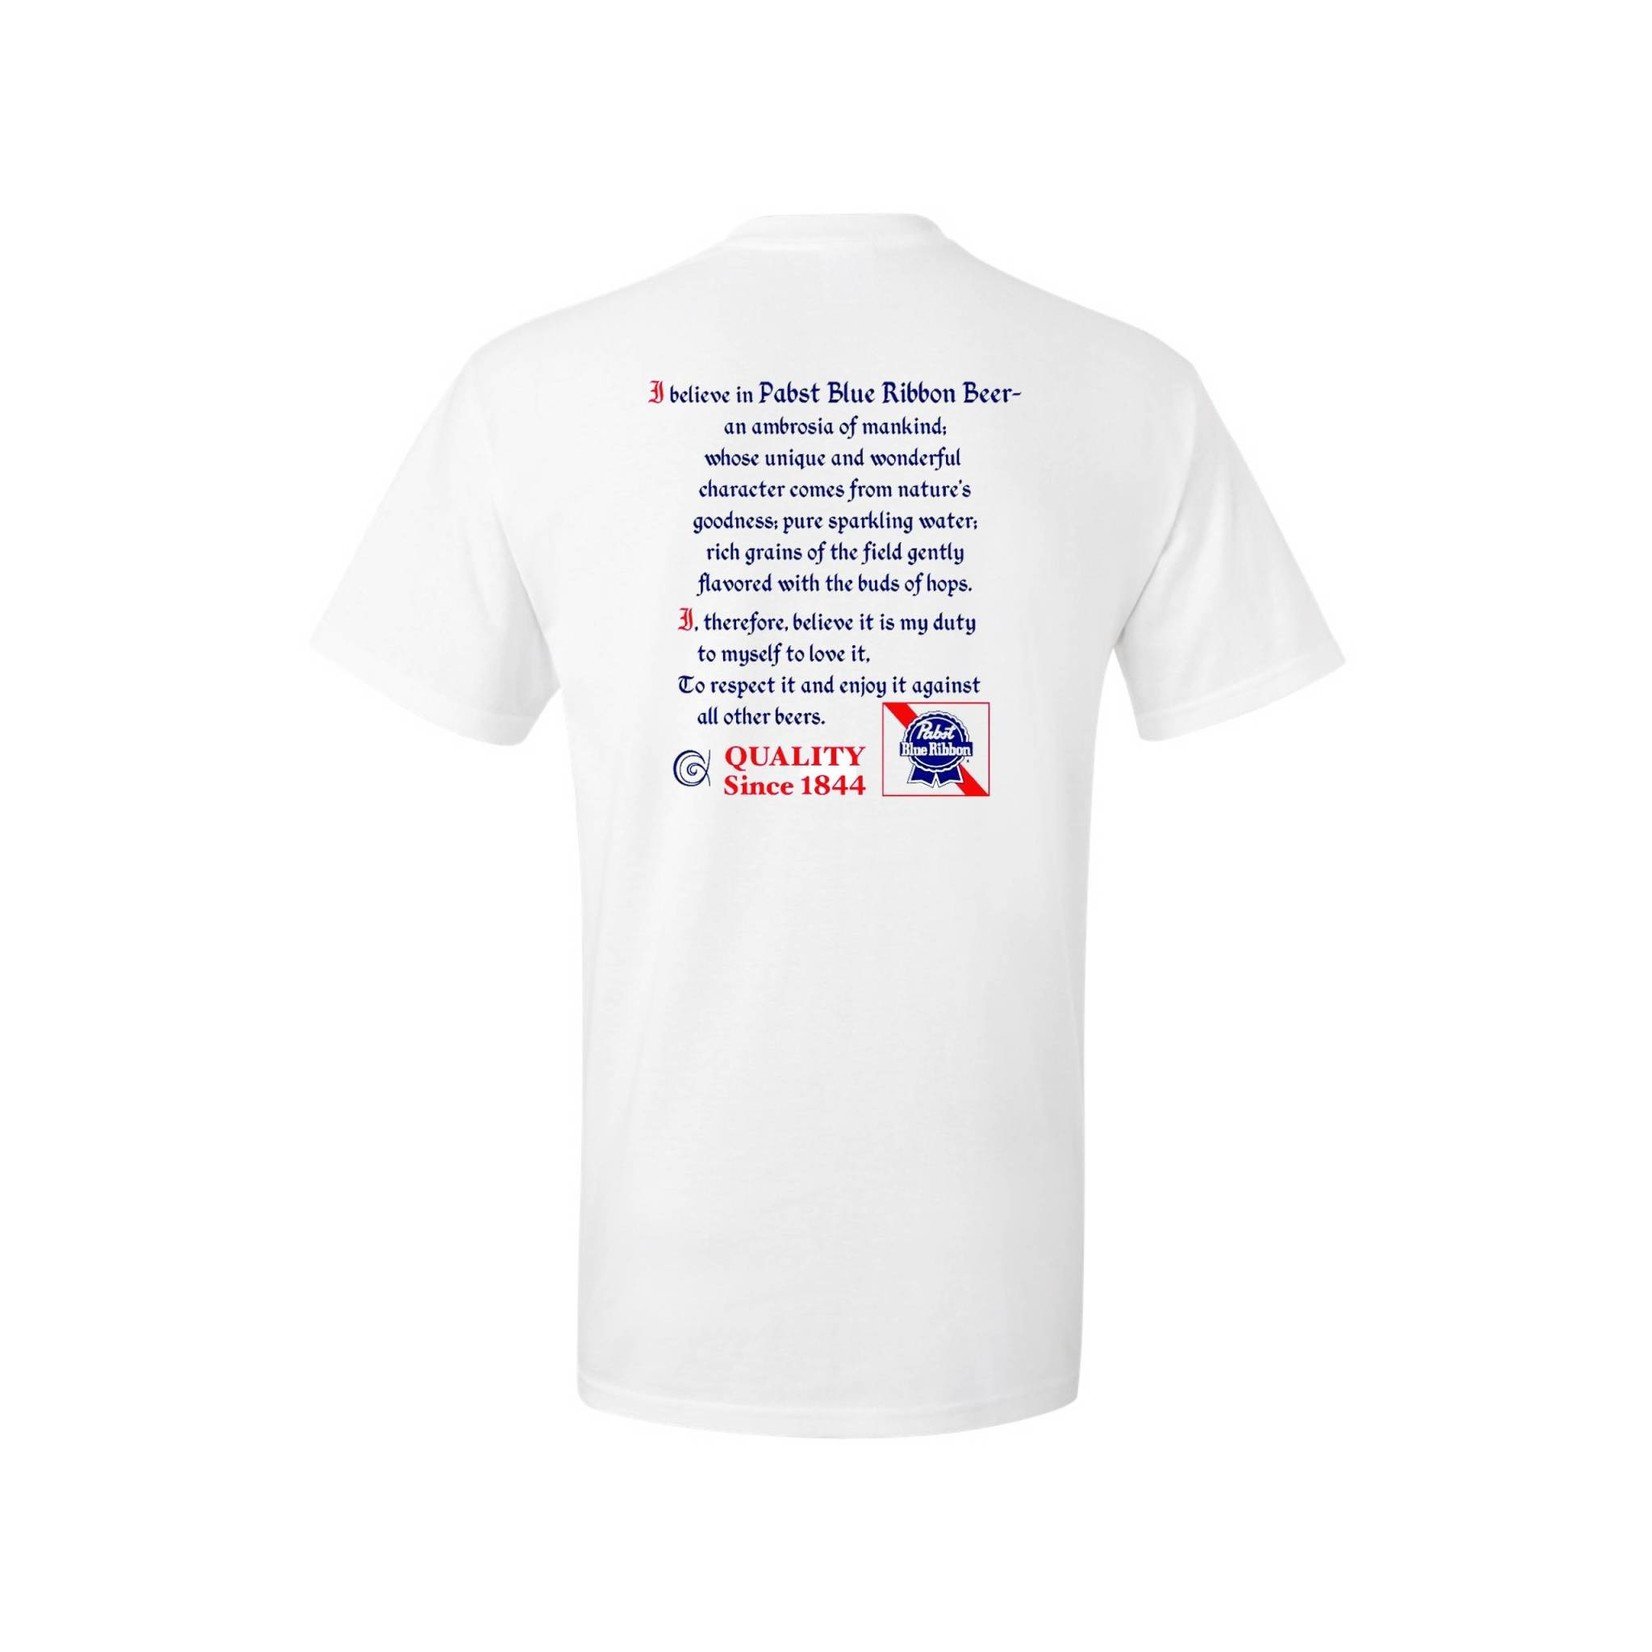 Pabst Pabst Beer Man's Creed Tee